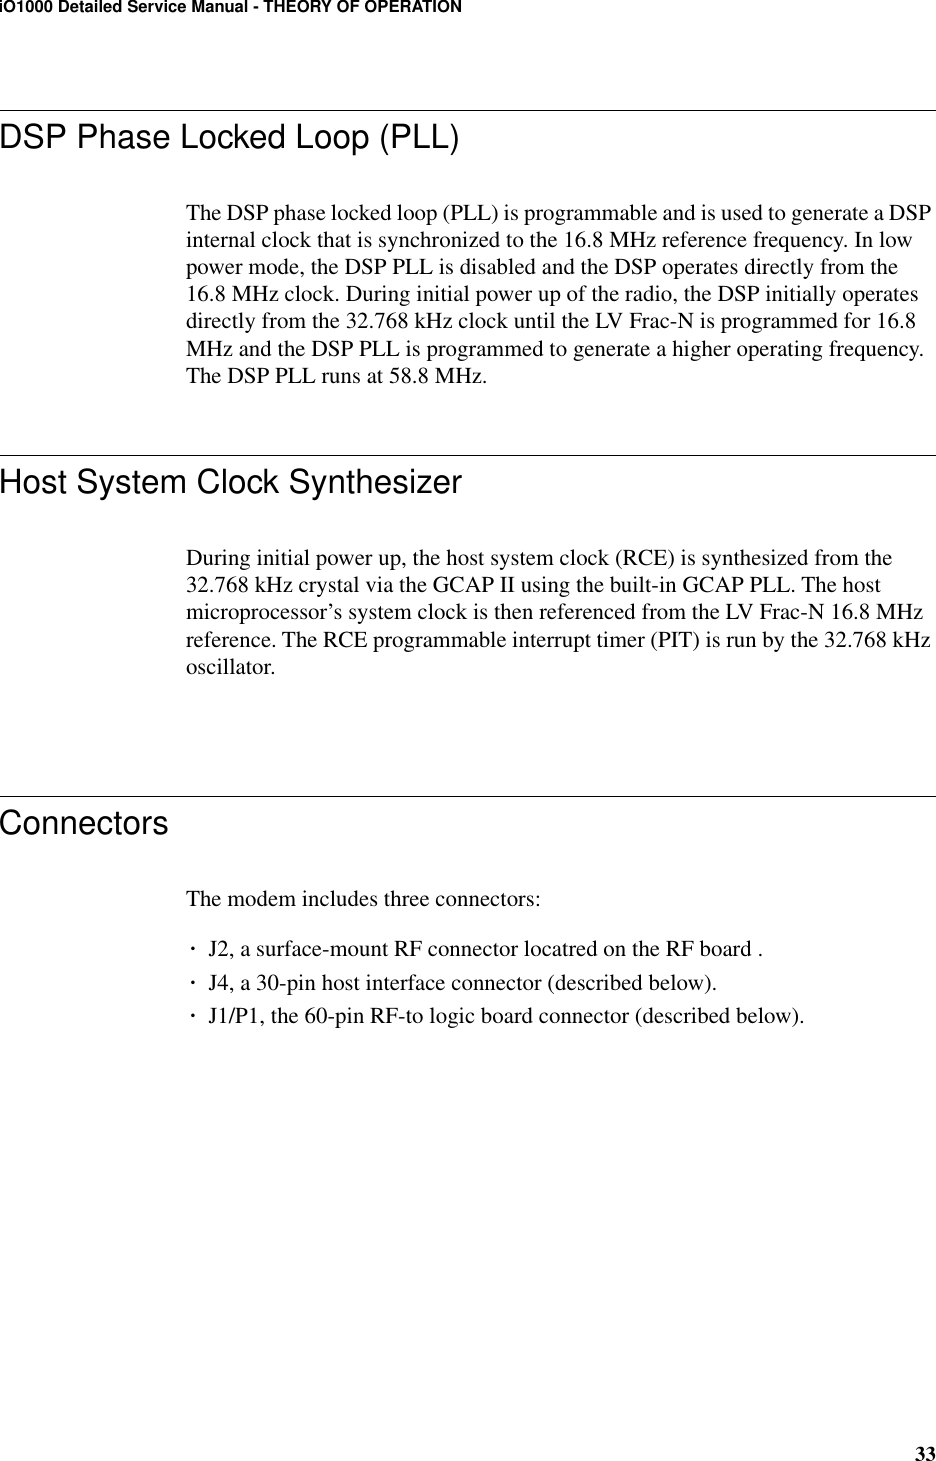 33iO1000 Detailed Service Manual - THEORY OF OPERATIONDSP Phase Locked Loop (PLL)The DSP phase locked loop (PLL) is programmable and is used to generate a DSP internal clock that is synchronized to the 16.8 MHz reference frequency. In low power mode, the DSP PLL is disabled and the DSP operates directly from the 16.8 MHz clock. During initial power up of the radio, the DSP initially operates directly from the 32.768 kHz clock until the LV Frac-N is programmed for 16.8 MHz and the DSP PLL is programmed to generate a higher operating frequency. The DSP PLL runs at 58.8 MHz.Host System Clock SynthesizerDuring initial power up, the host system clock (RCE) is synthesized from the 32.768 kHz crystal via the GCAP II using the built-in GCAP PLL. The host microprocessor’s system clock is then referenced from the LV Frac-N 16.8 MHz reference. The RCE programmable interrupt timer (PIT) is run by the 32.768 kHz oscillator.ConnectorsThe modem includes three connectors:¥J2, a surface-mount RF connector locatred on the RF board .¥J4, a 30-pin host interface connector (described below).¥J1/P1, the 60-pin RF-to logic board connector (described below).